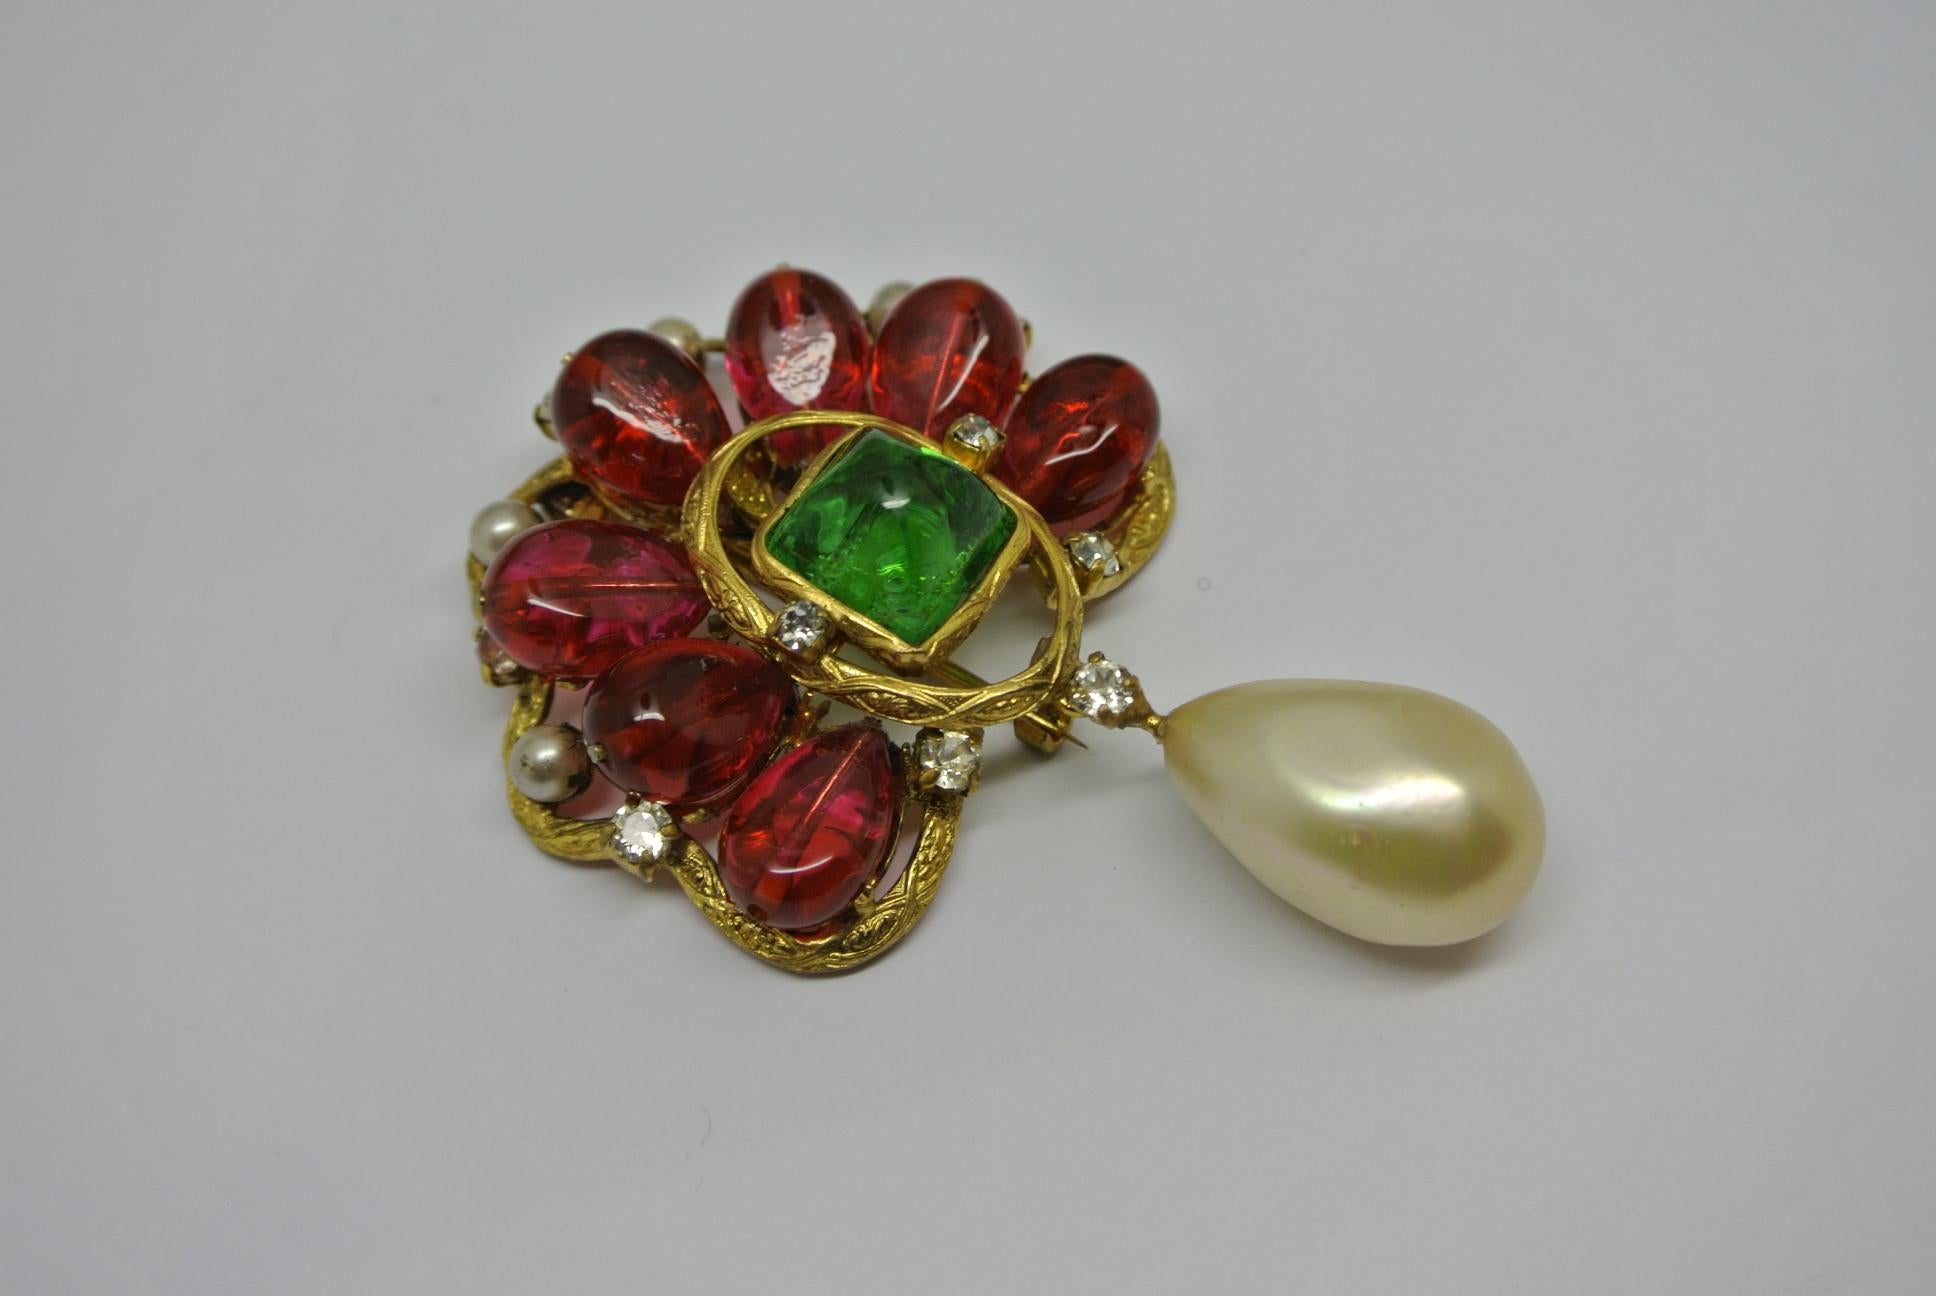 A museum quality Chanel brooch, worn by Coco Chanel herself. Comes with classic red and green poured glass, made by Gripoix workshop.  